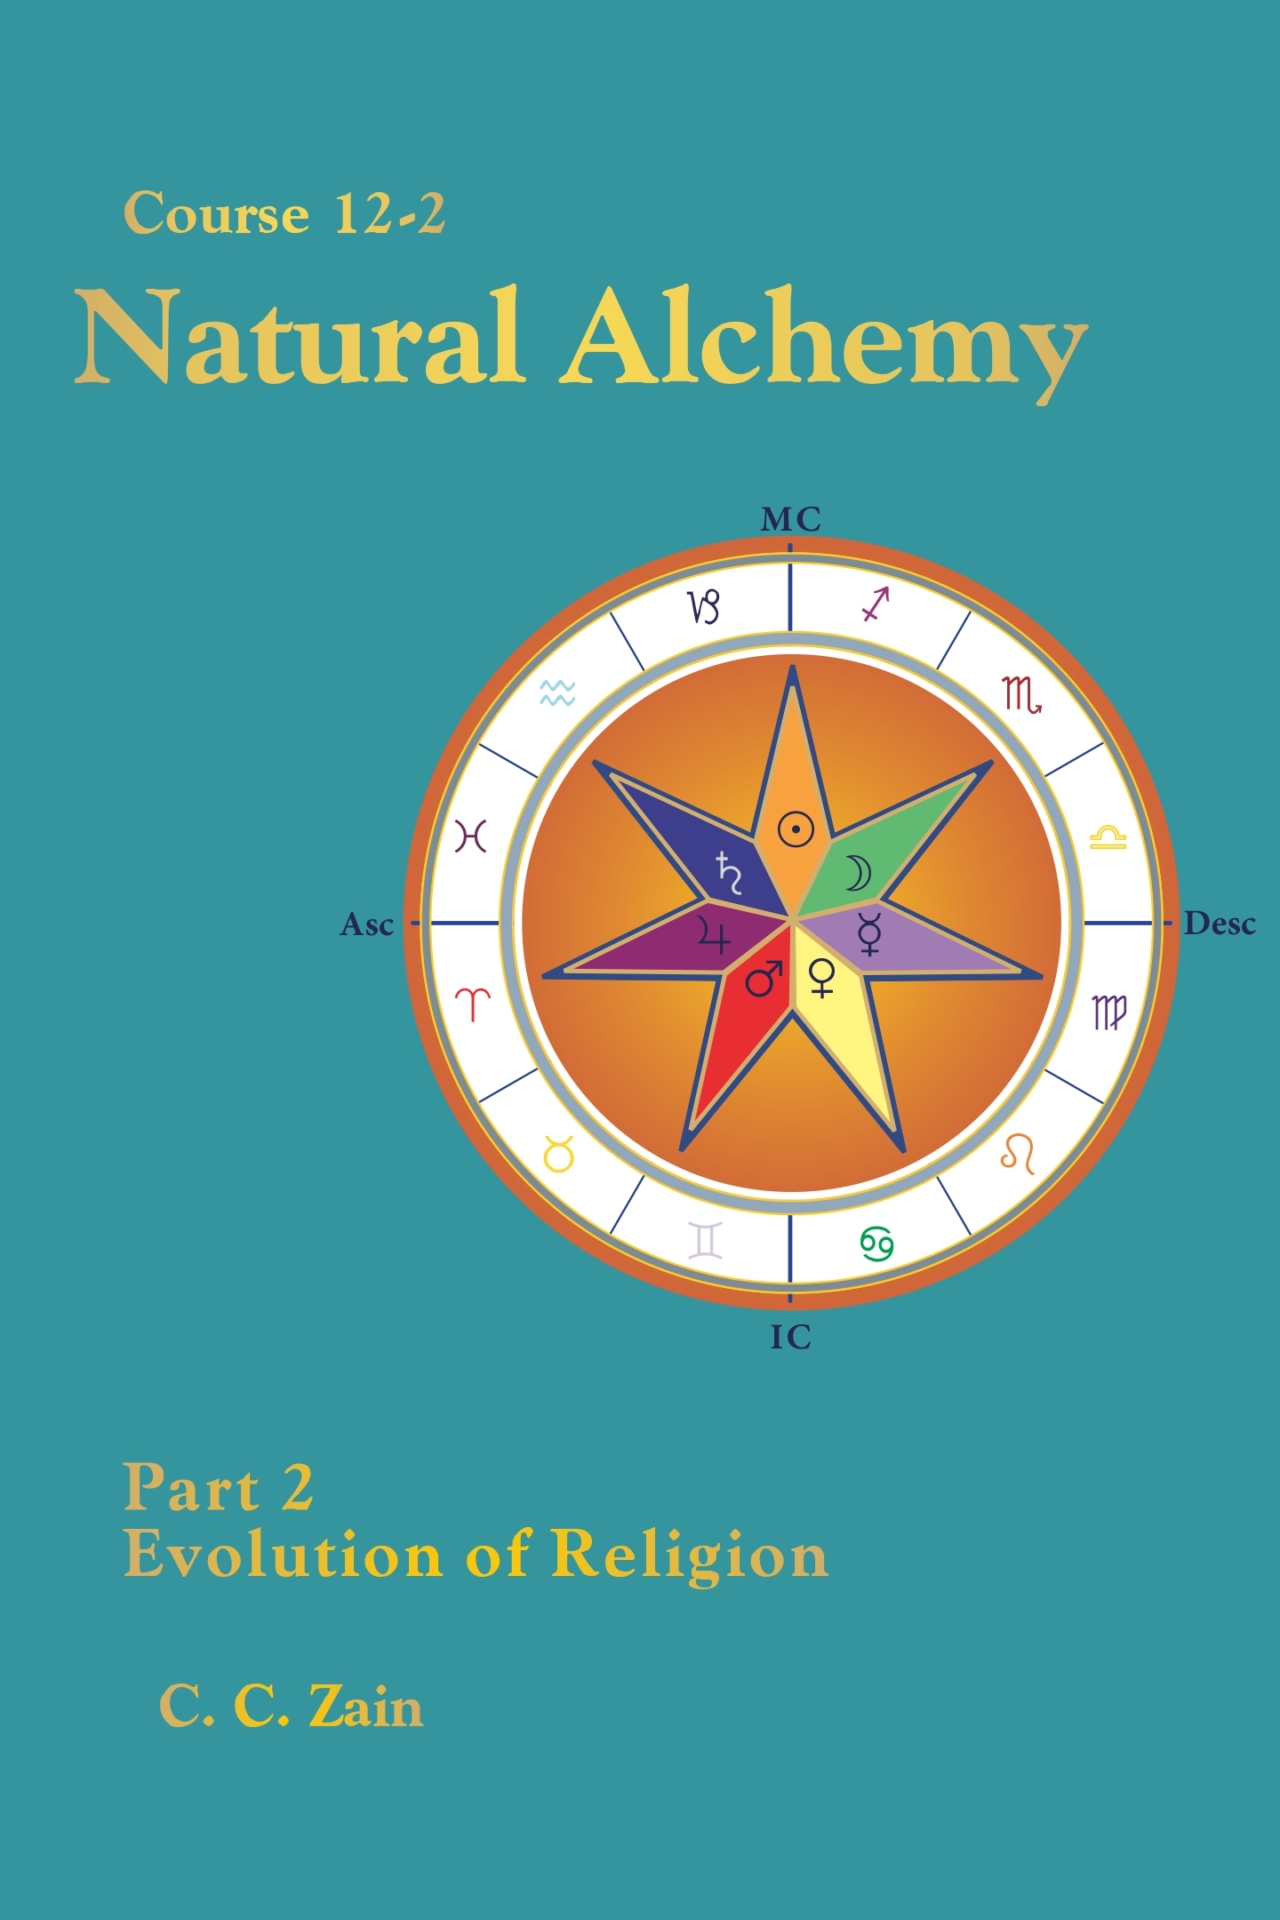 https://study.academyofhermeticarts.org/wp-content/uploads/2020/04/12-2_Evolution_of_Religion_eBook_Cover-1280x1920.jpg